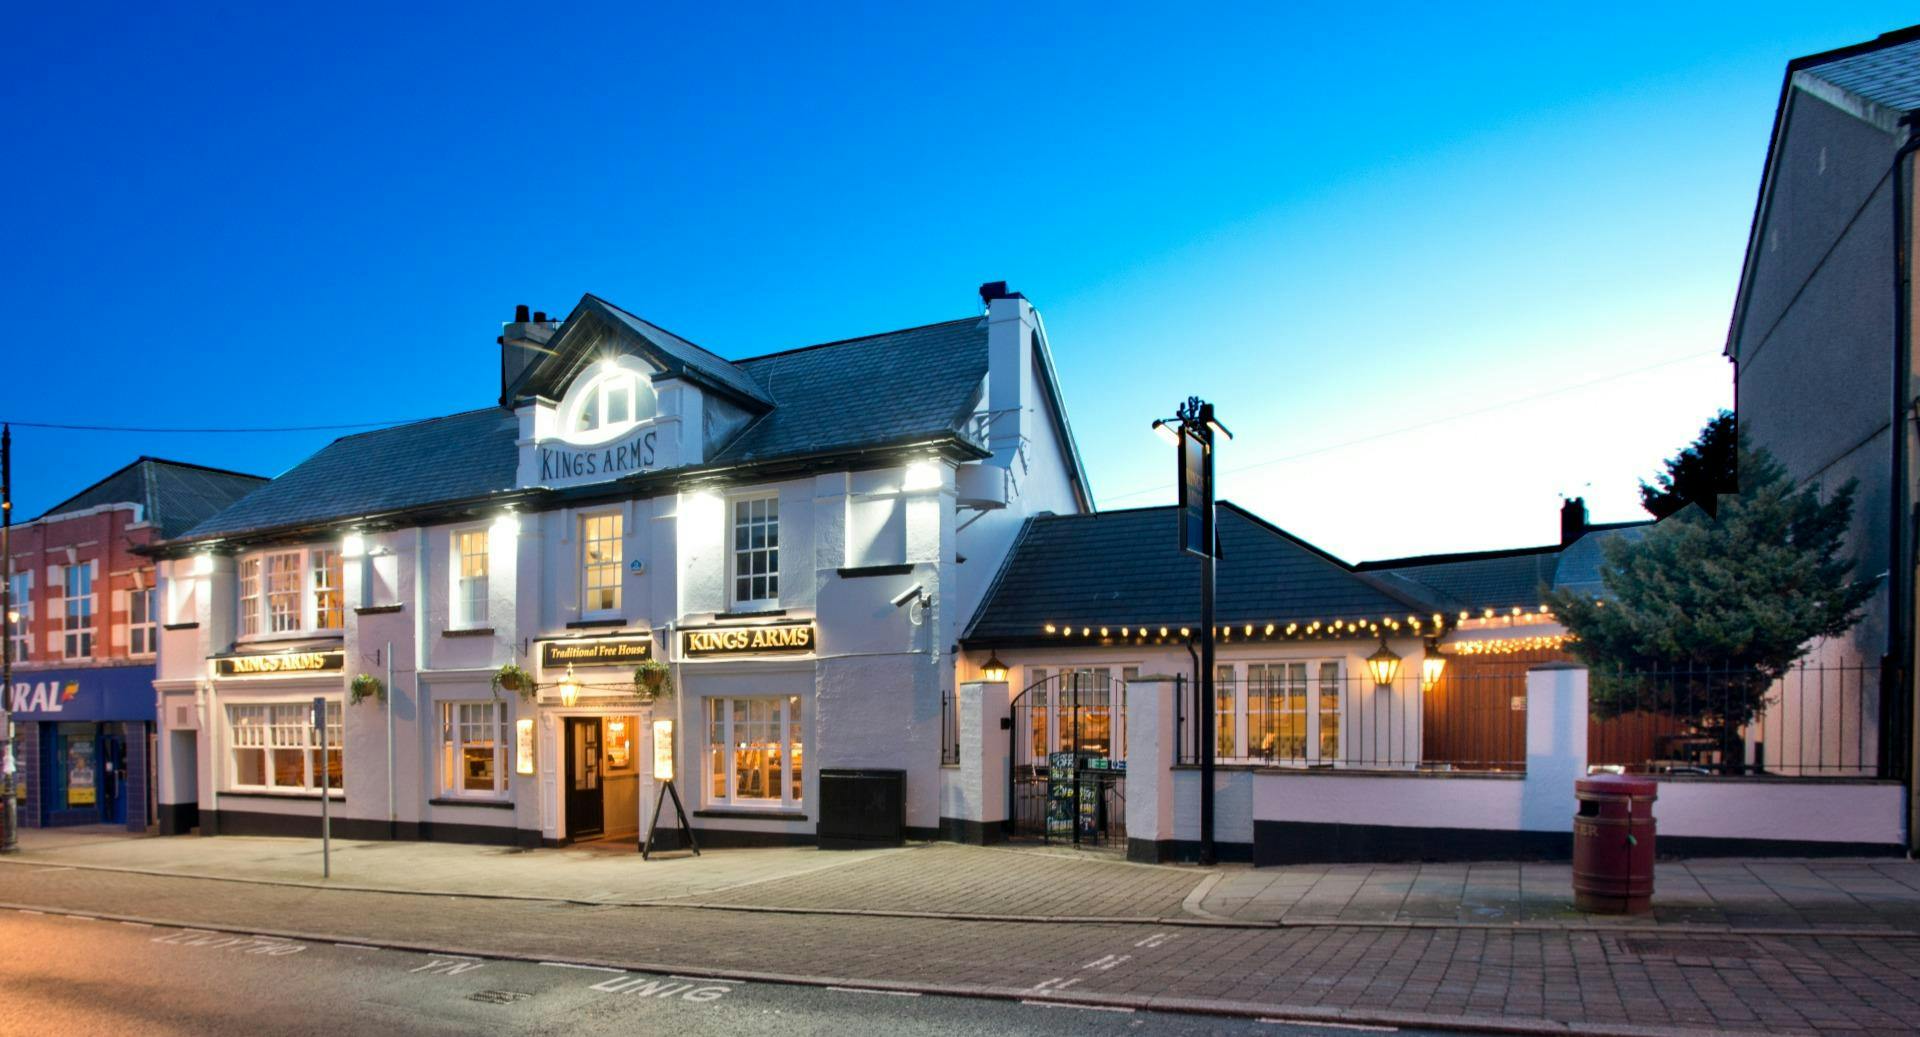 Photo of restaurant Kings Arms Caerphilly in Nantgarw, Caerphilly